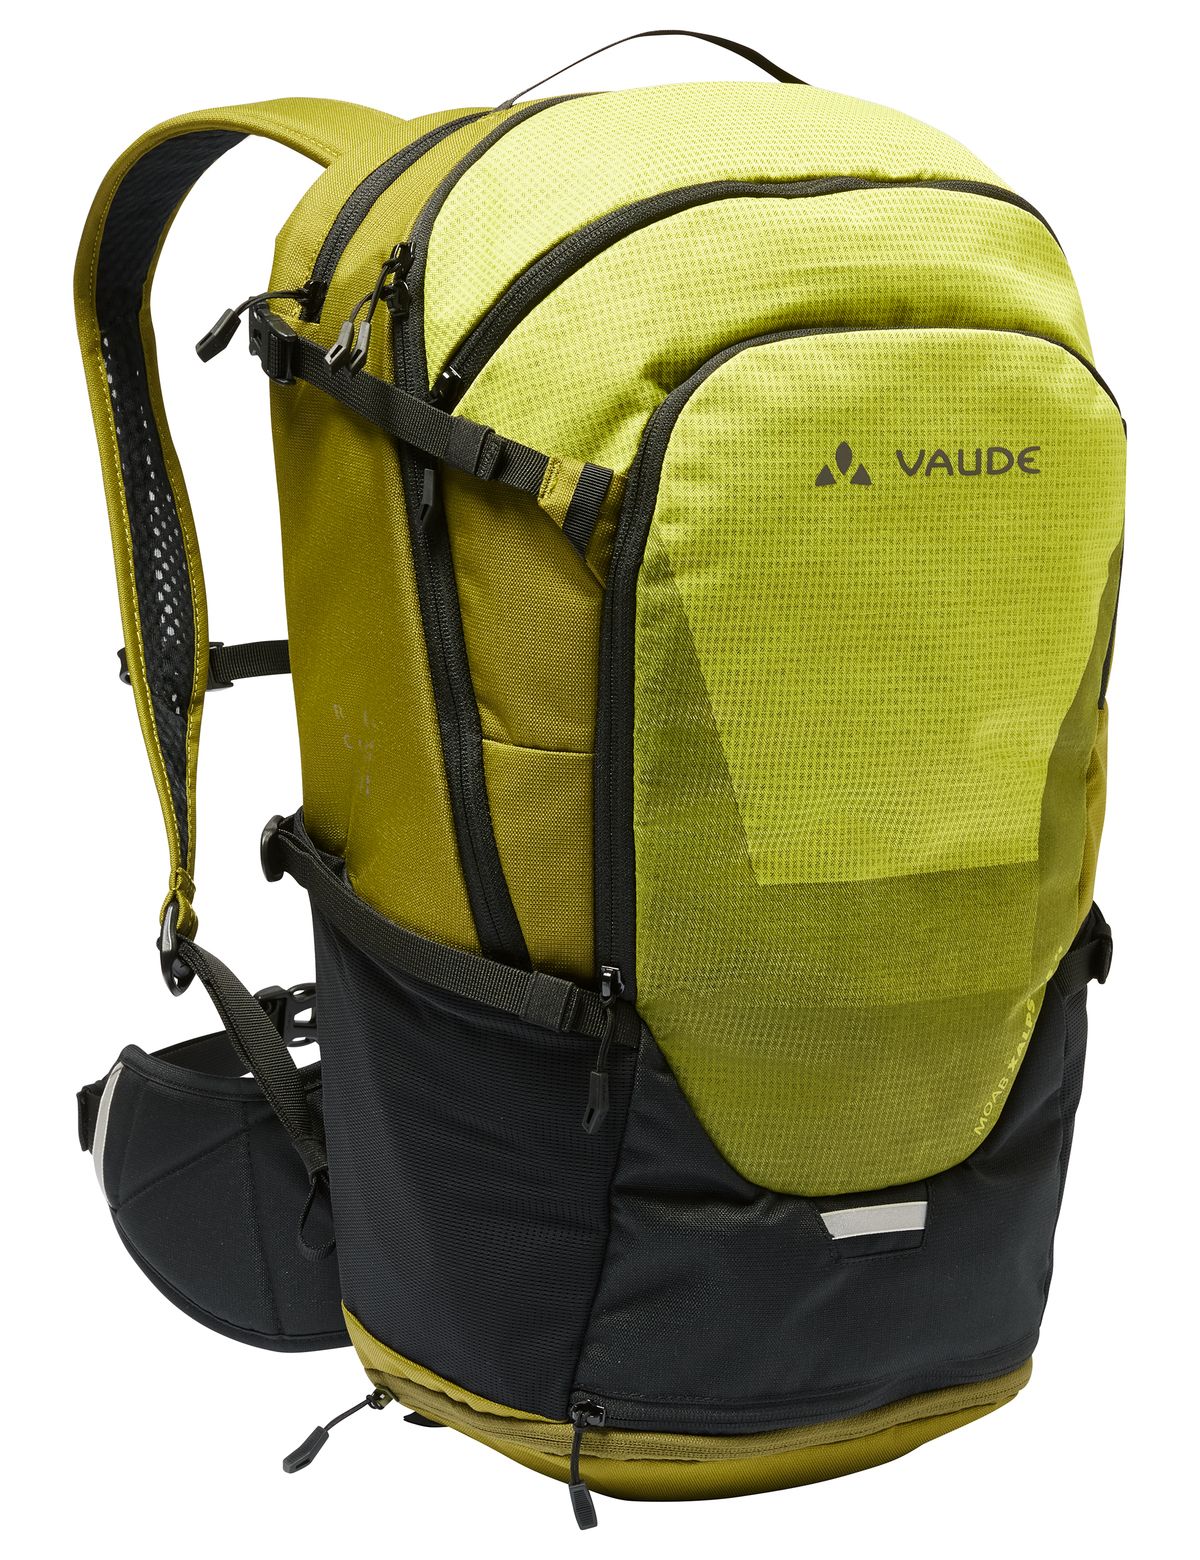 VAUDE's Moab mountain bike collection for your off-road adventures.